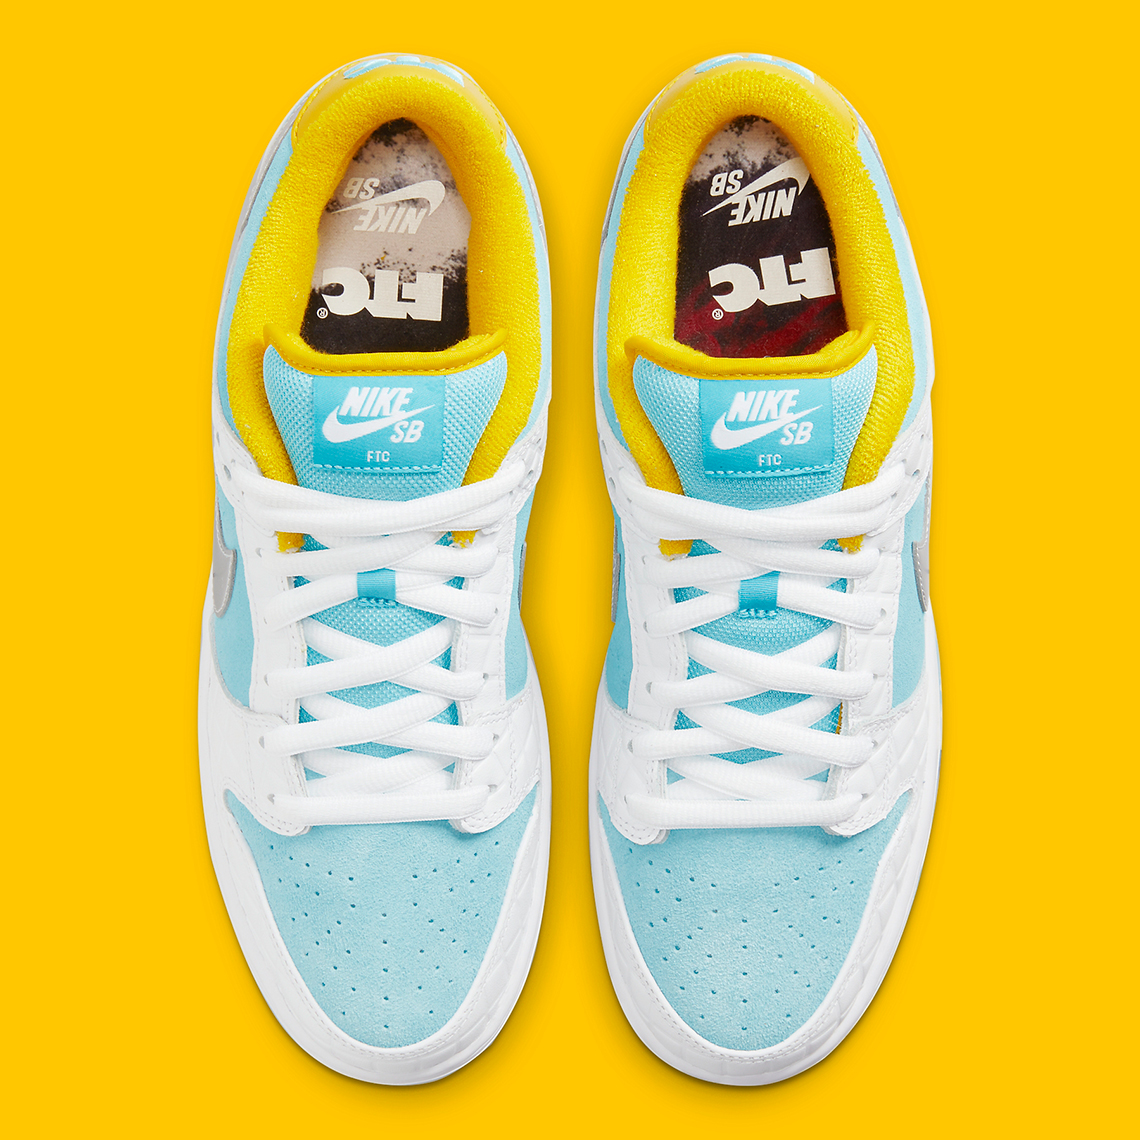 FTC Nike SB Dunk Low DH7687-400 Release Date | SneakerNews.com